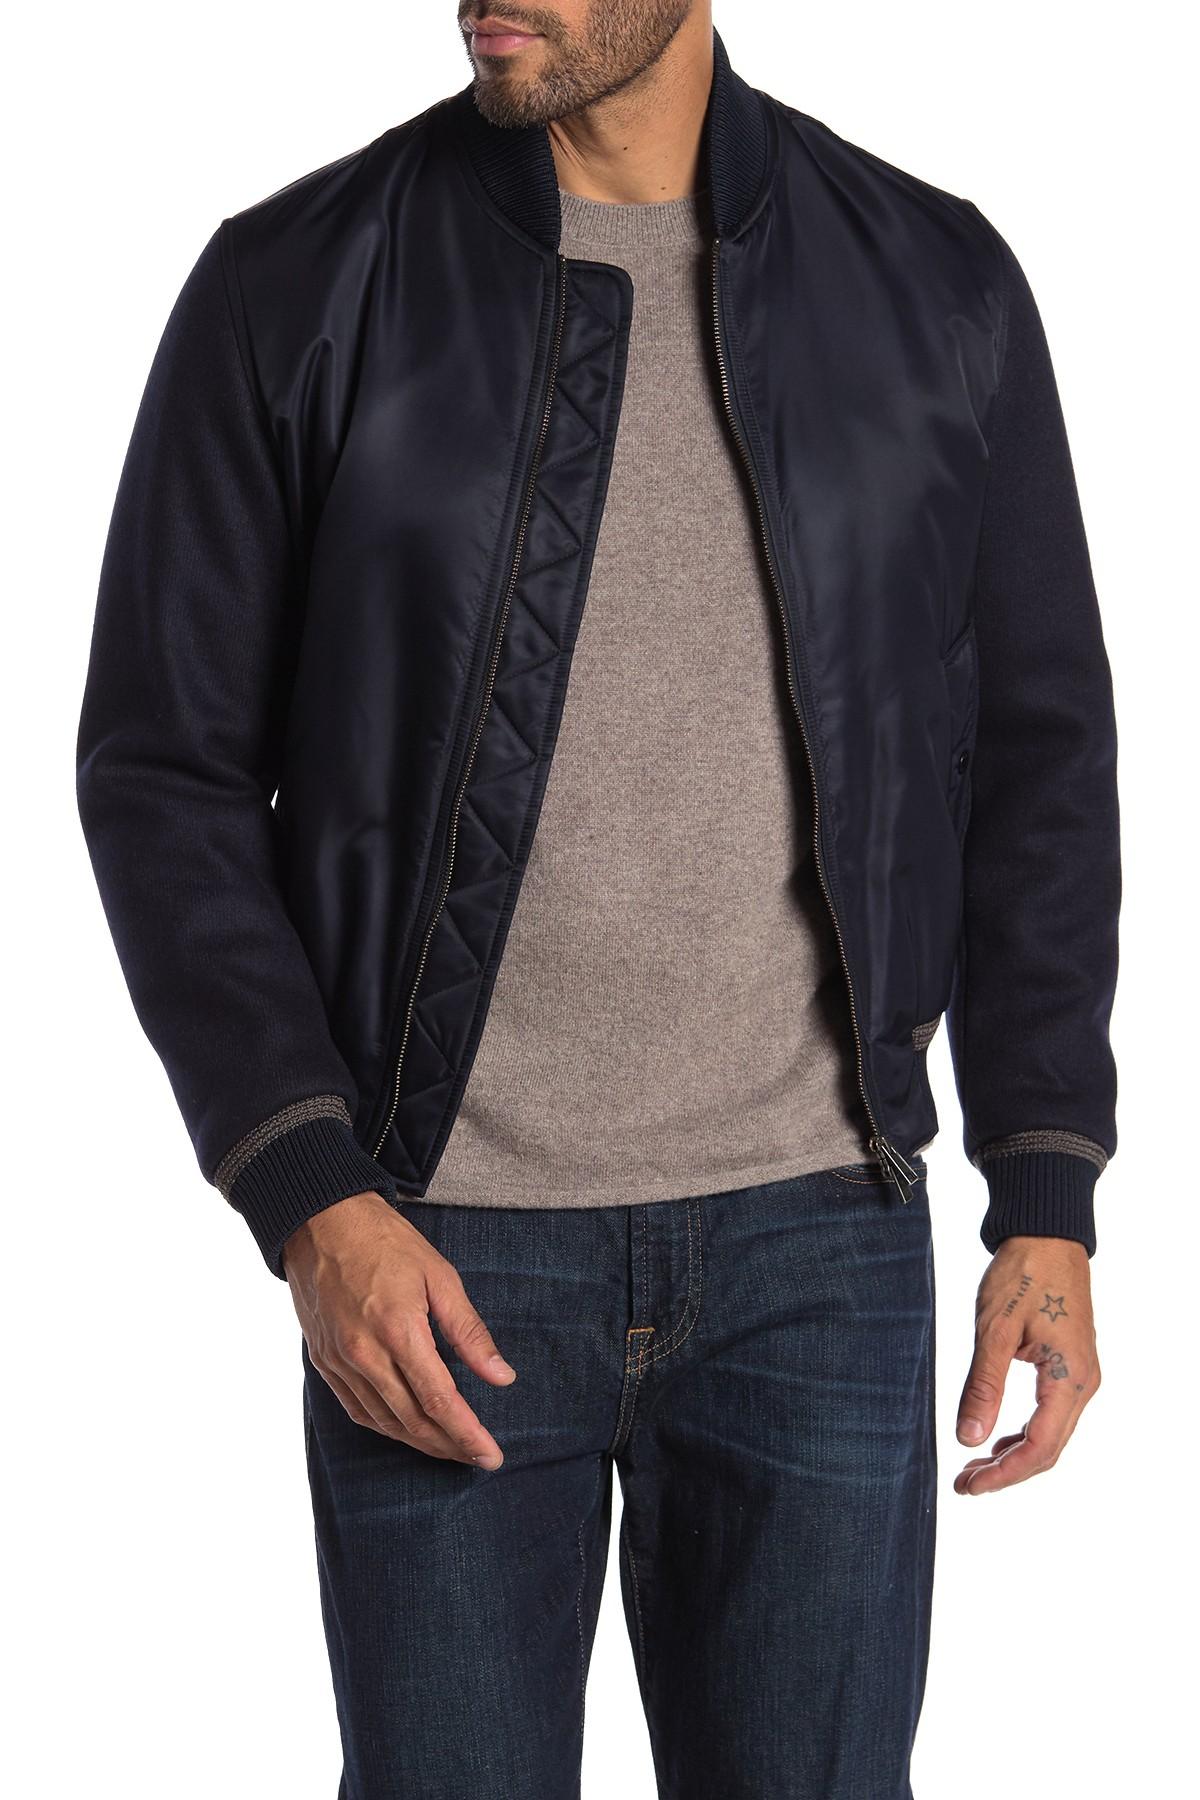 BOSS Cabe Bomber Jacket in Blue for Men - Save 23% - Lyst